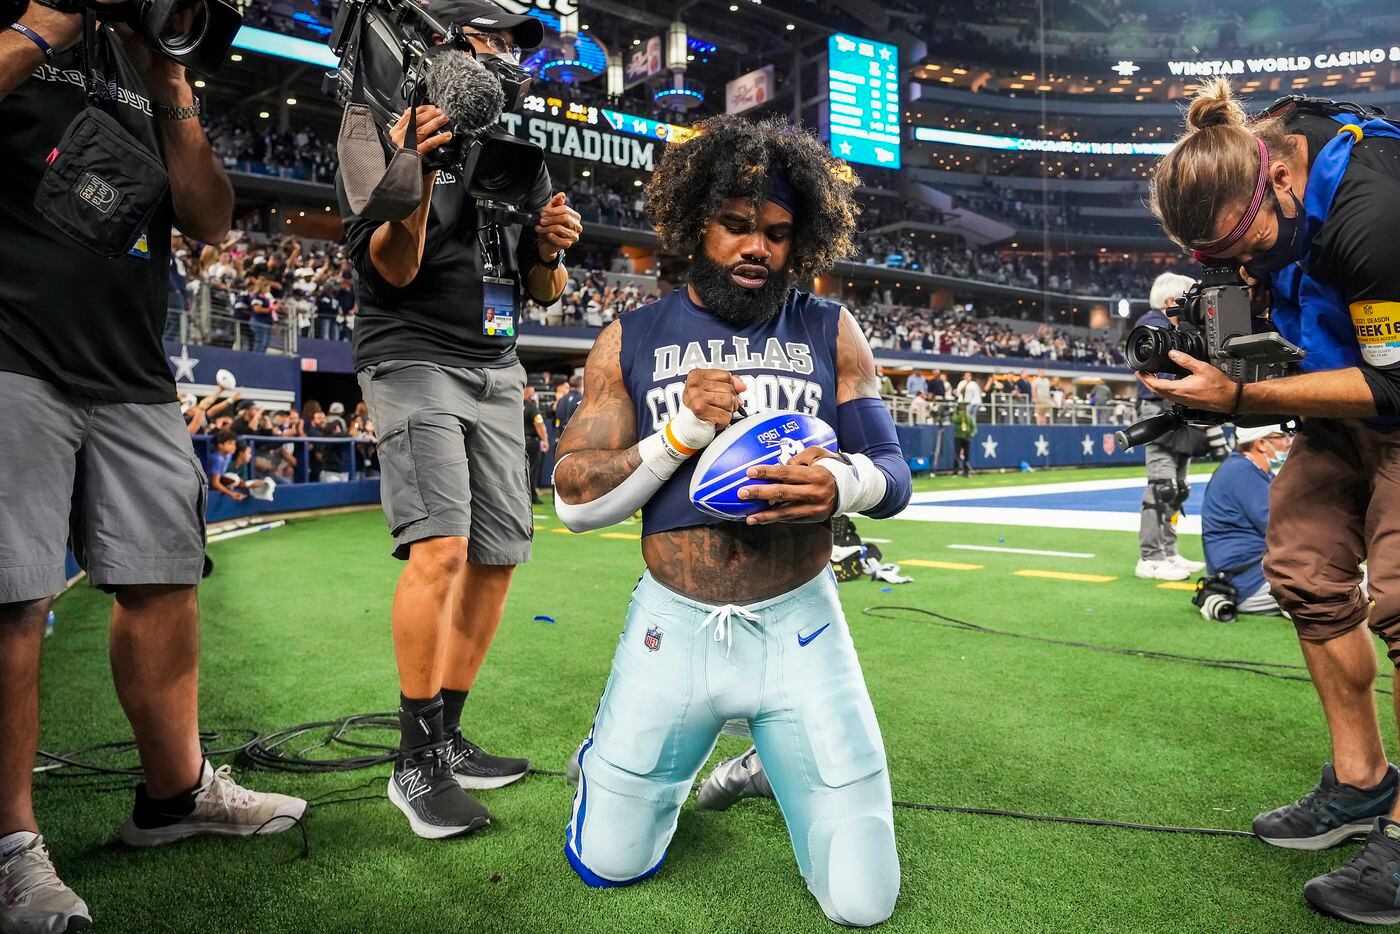 Dallas Cowboys running back Ezekiel Elliott autographs a football for a fan as he leaves the field following a victory over the Washington Football Team in an NFL football game at AT&T Stadium on Sunday, Dec. 26, 2021, in Arlington. The Cowboys won the game 56-14.